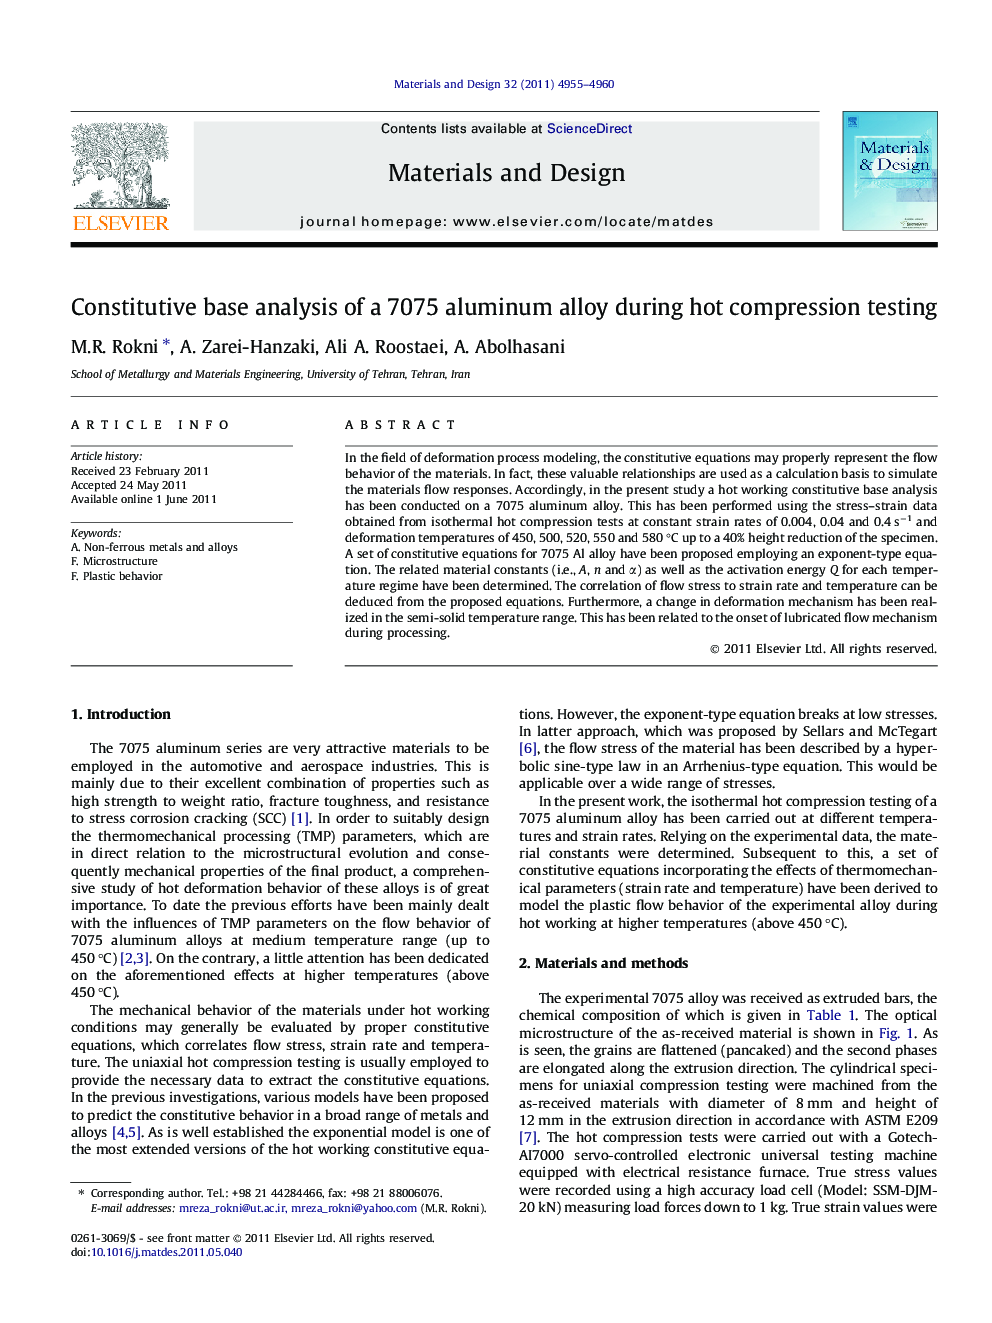 Constitutive base analysis of a 7075 aluminum alloy during hot compression testing